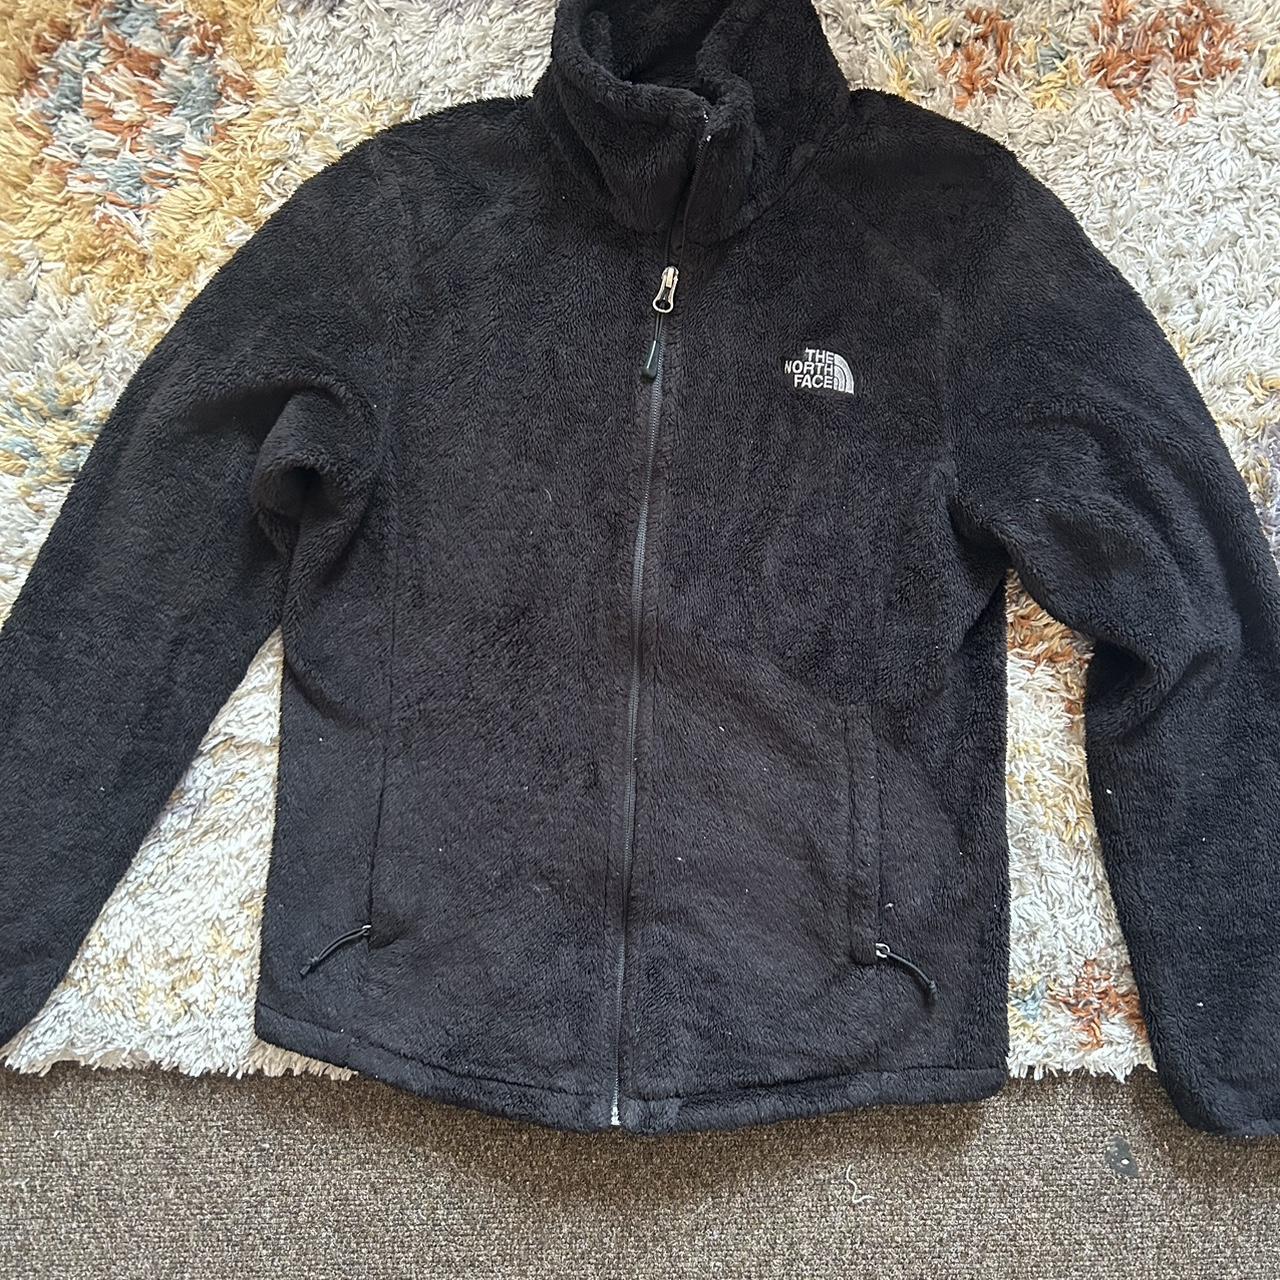 Fuzzy North face fleece jacket size small would... - Depop